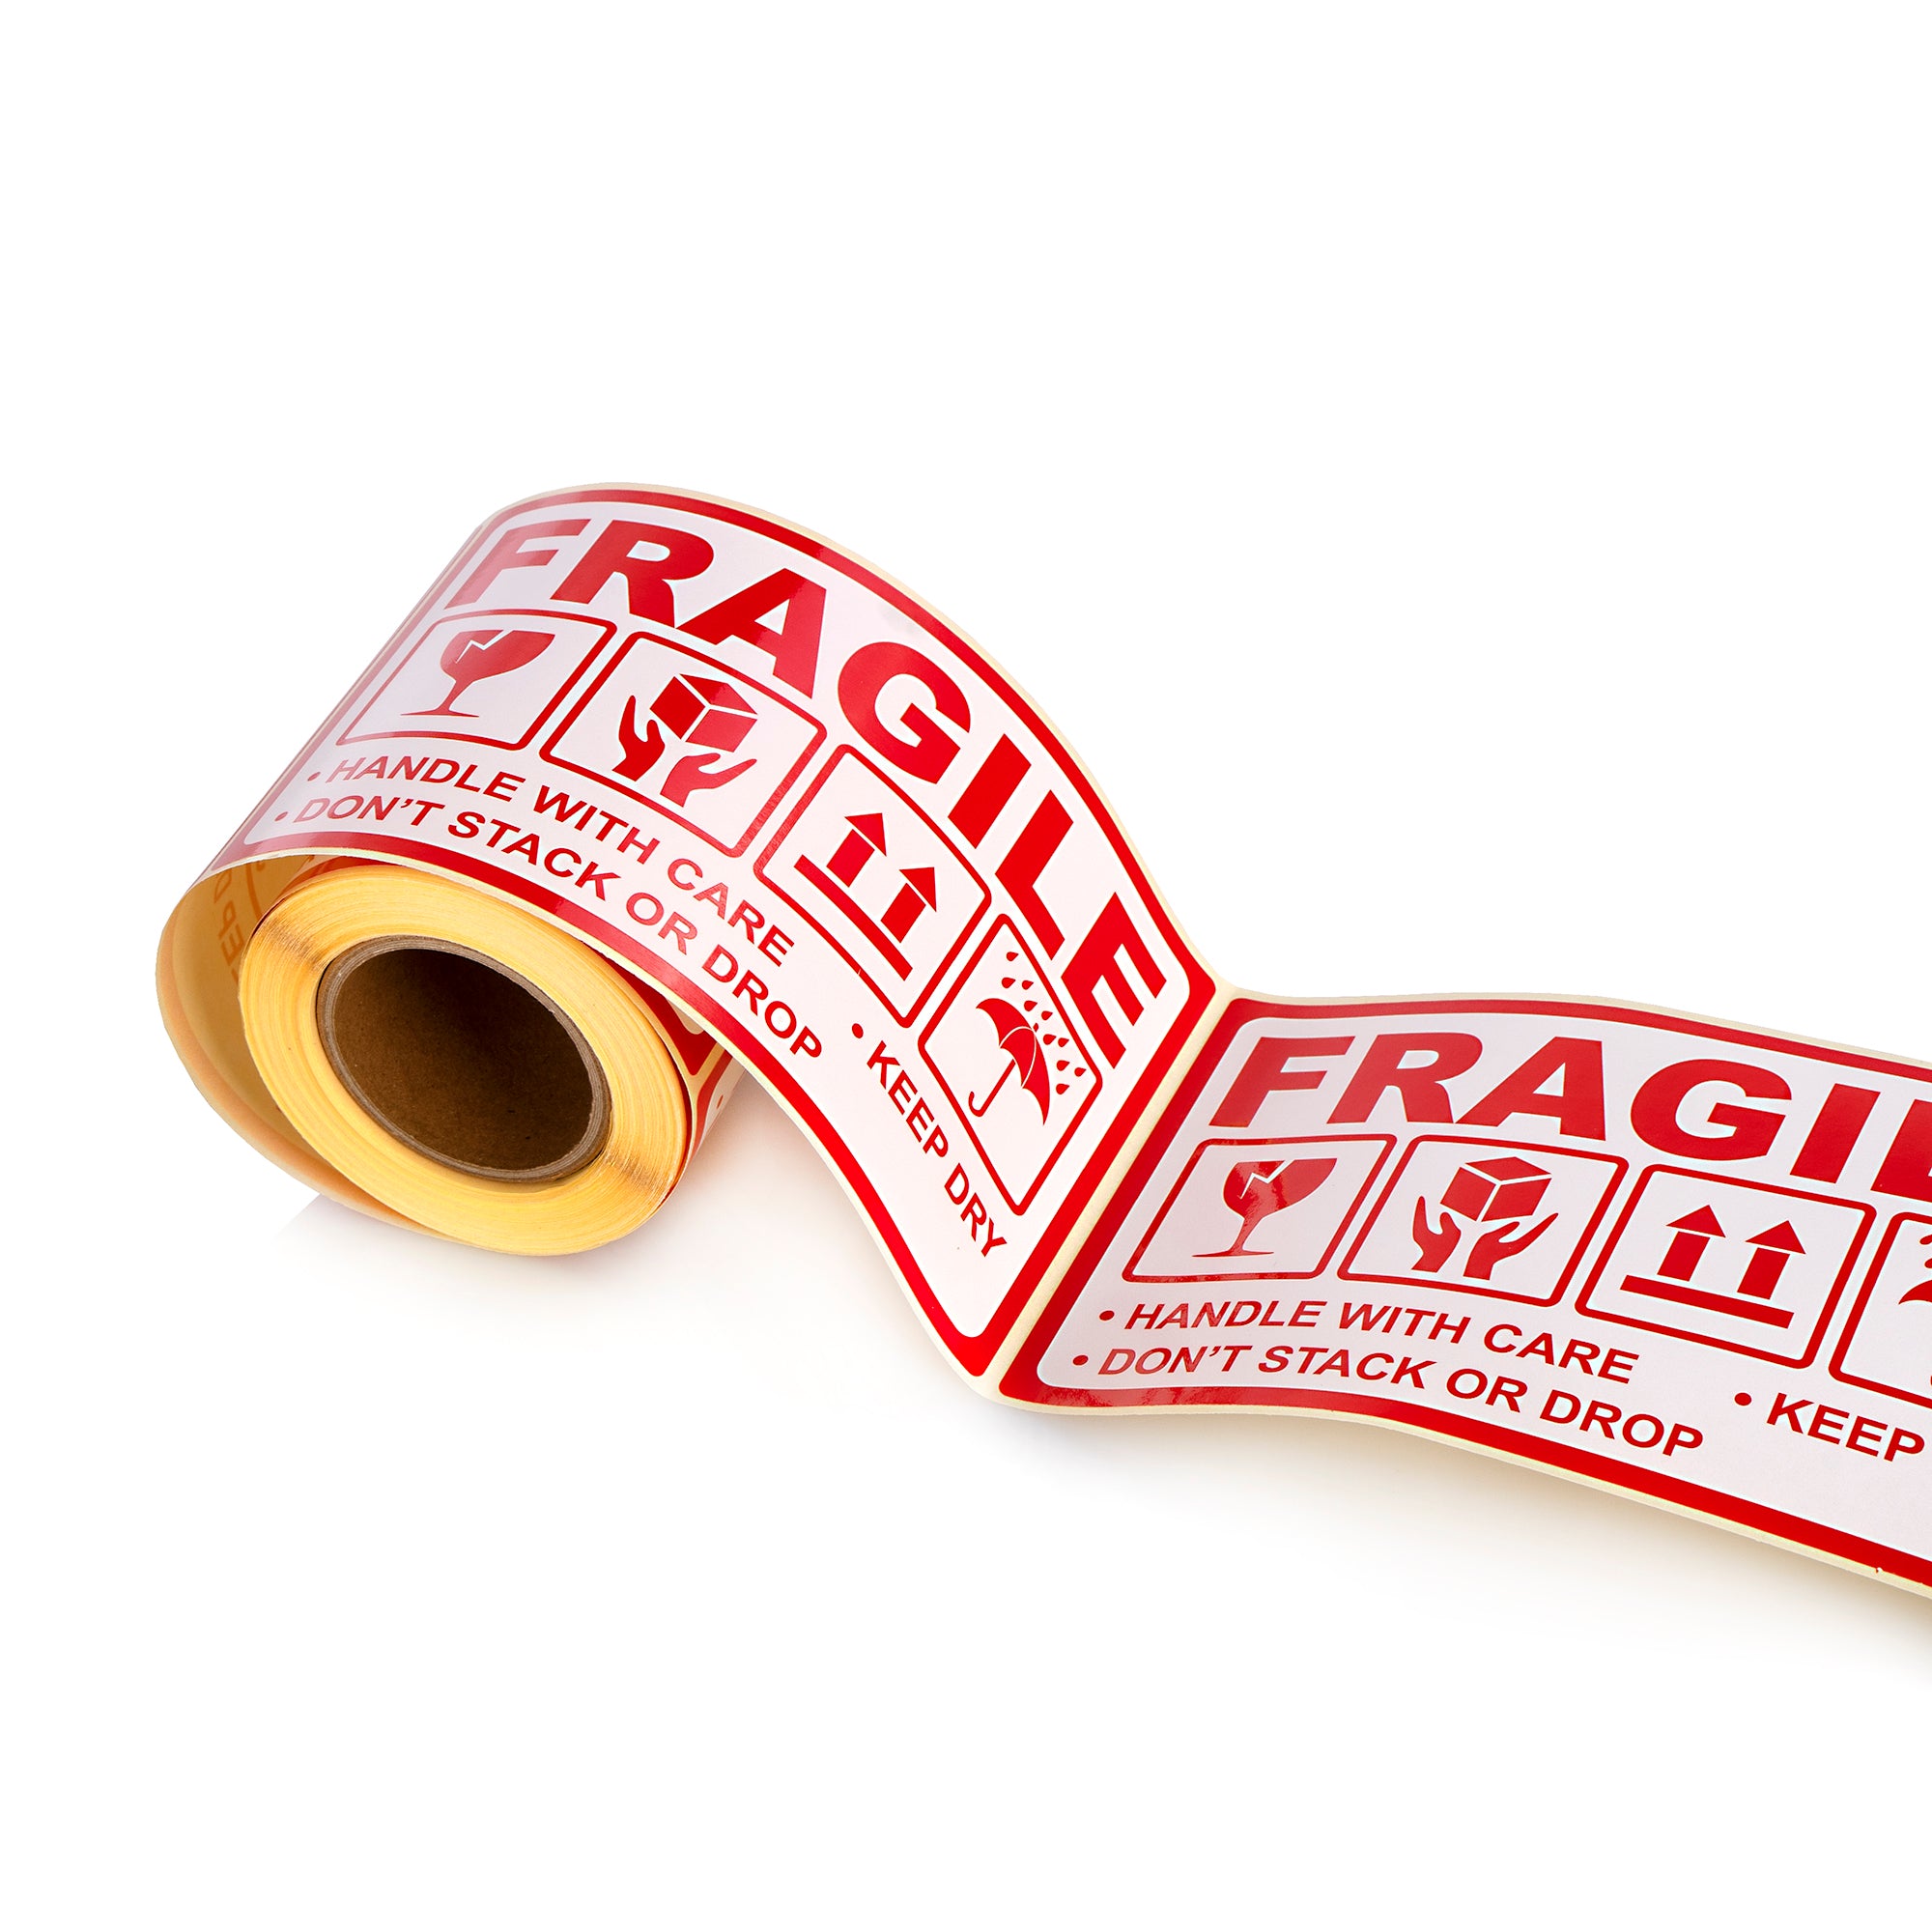 Fragile: Handle With Care Don't Stack Or Drop Red - Shipping Label